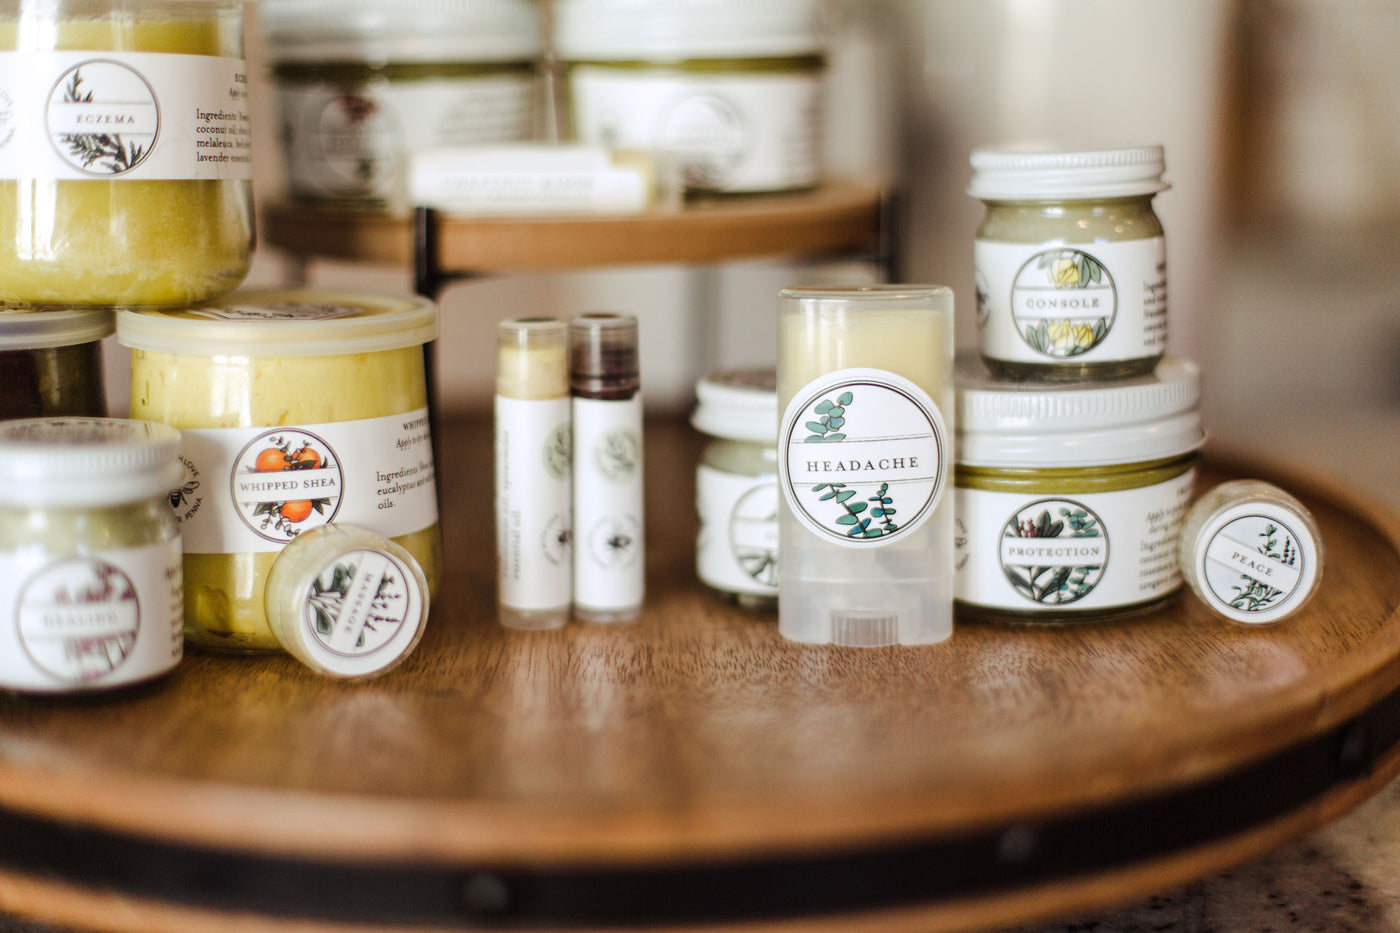 Natural wellness balms, lotions and beeswax chapsticks from Chestnut Ridge Honey & Beeswax Products - Lancaster, Pa